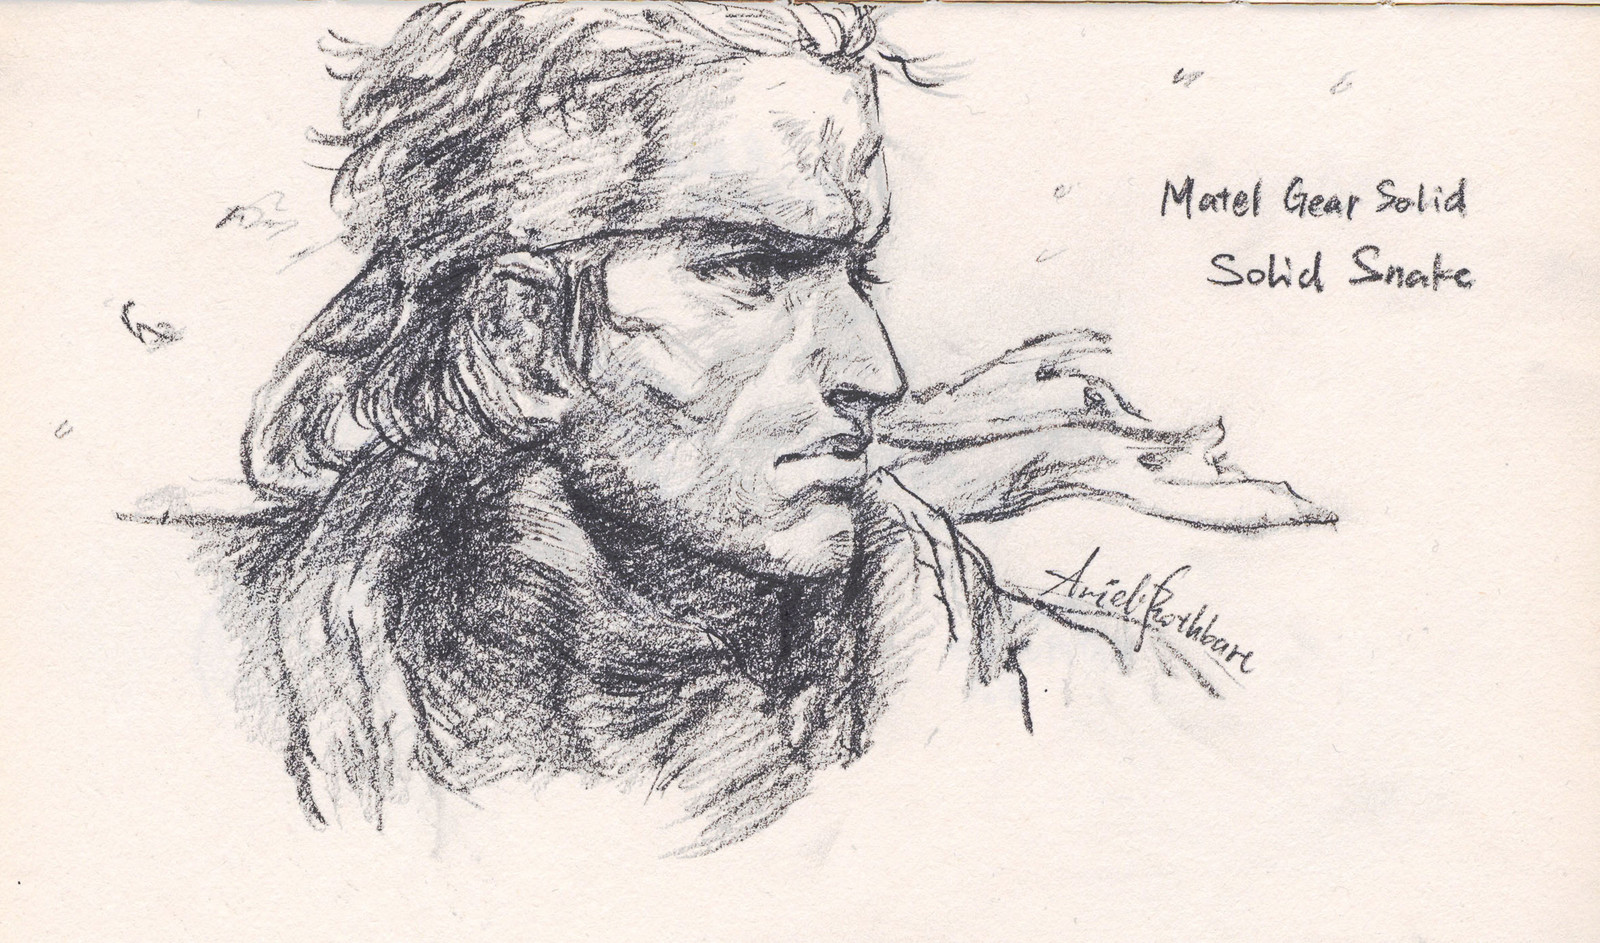 Solid Snake (pencil)